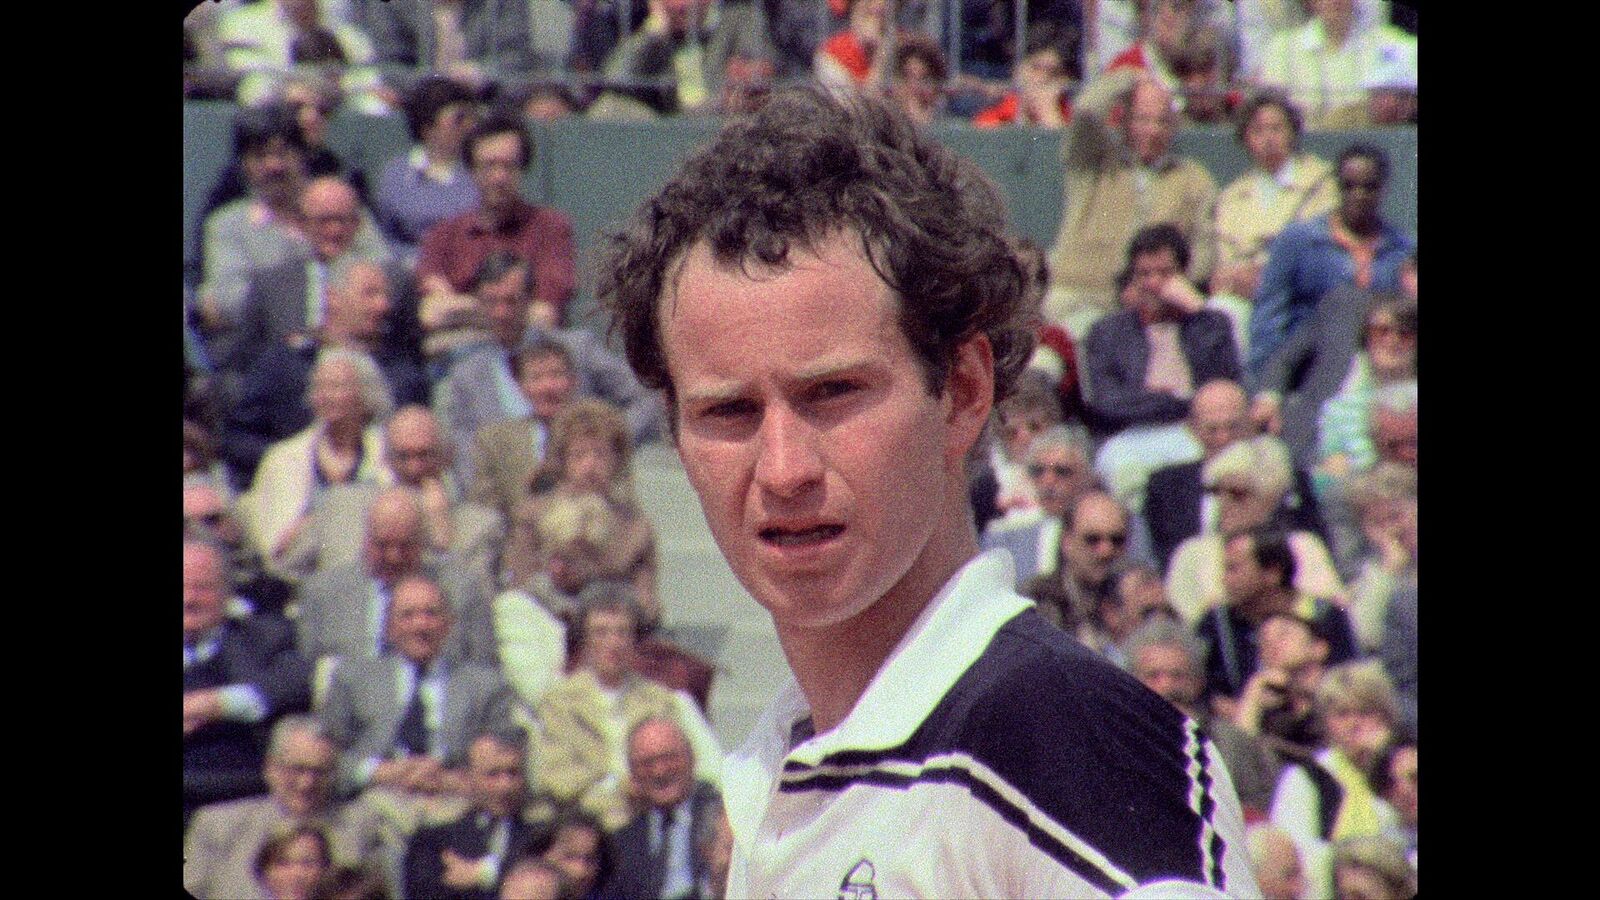 New McEnroe Documentary Explores His Quest for Perfection 